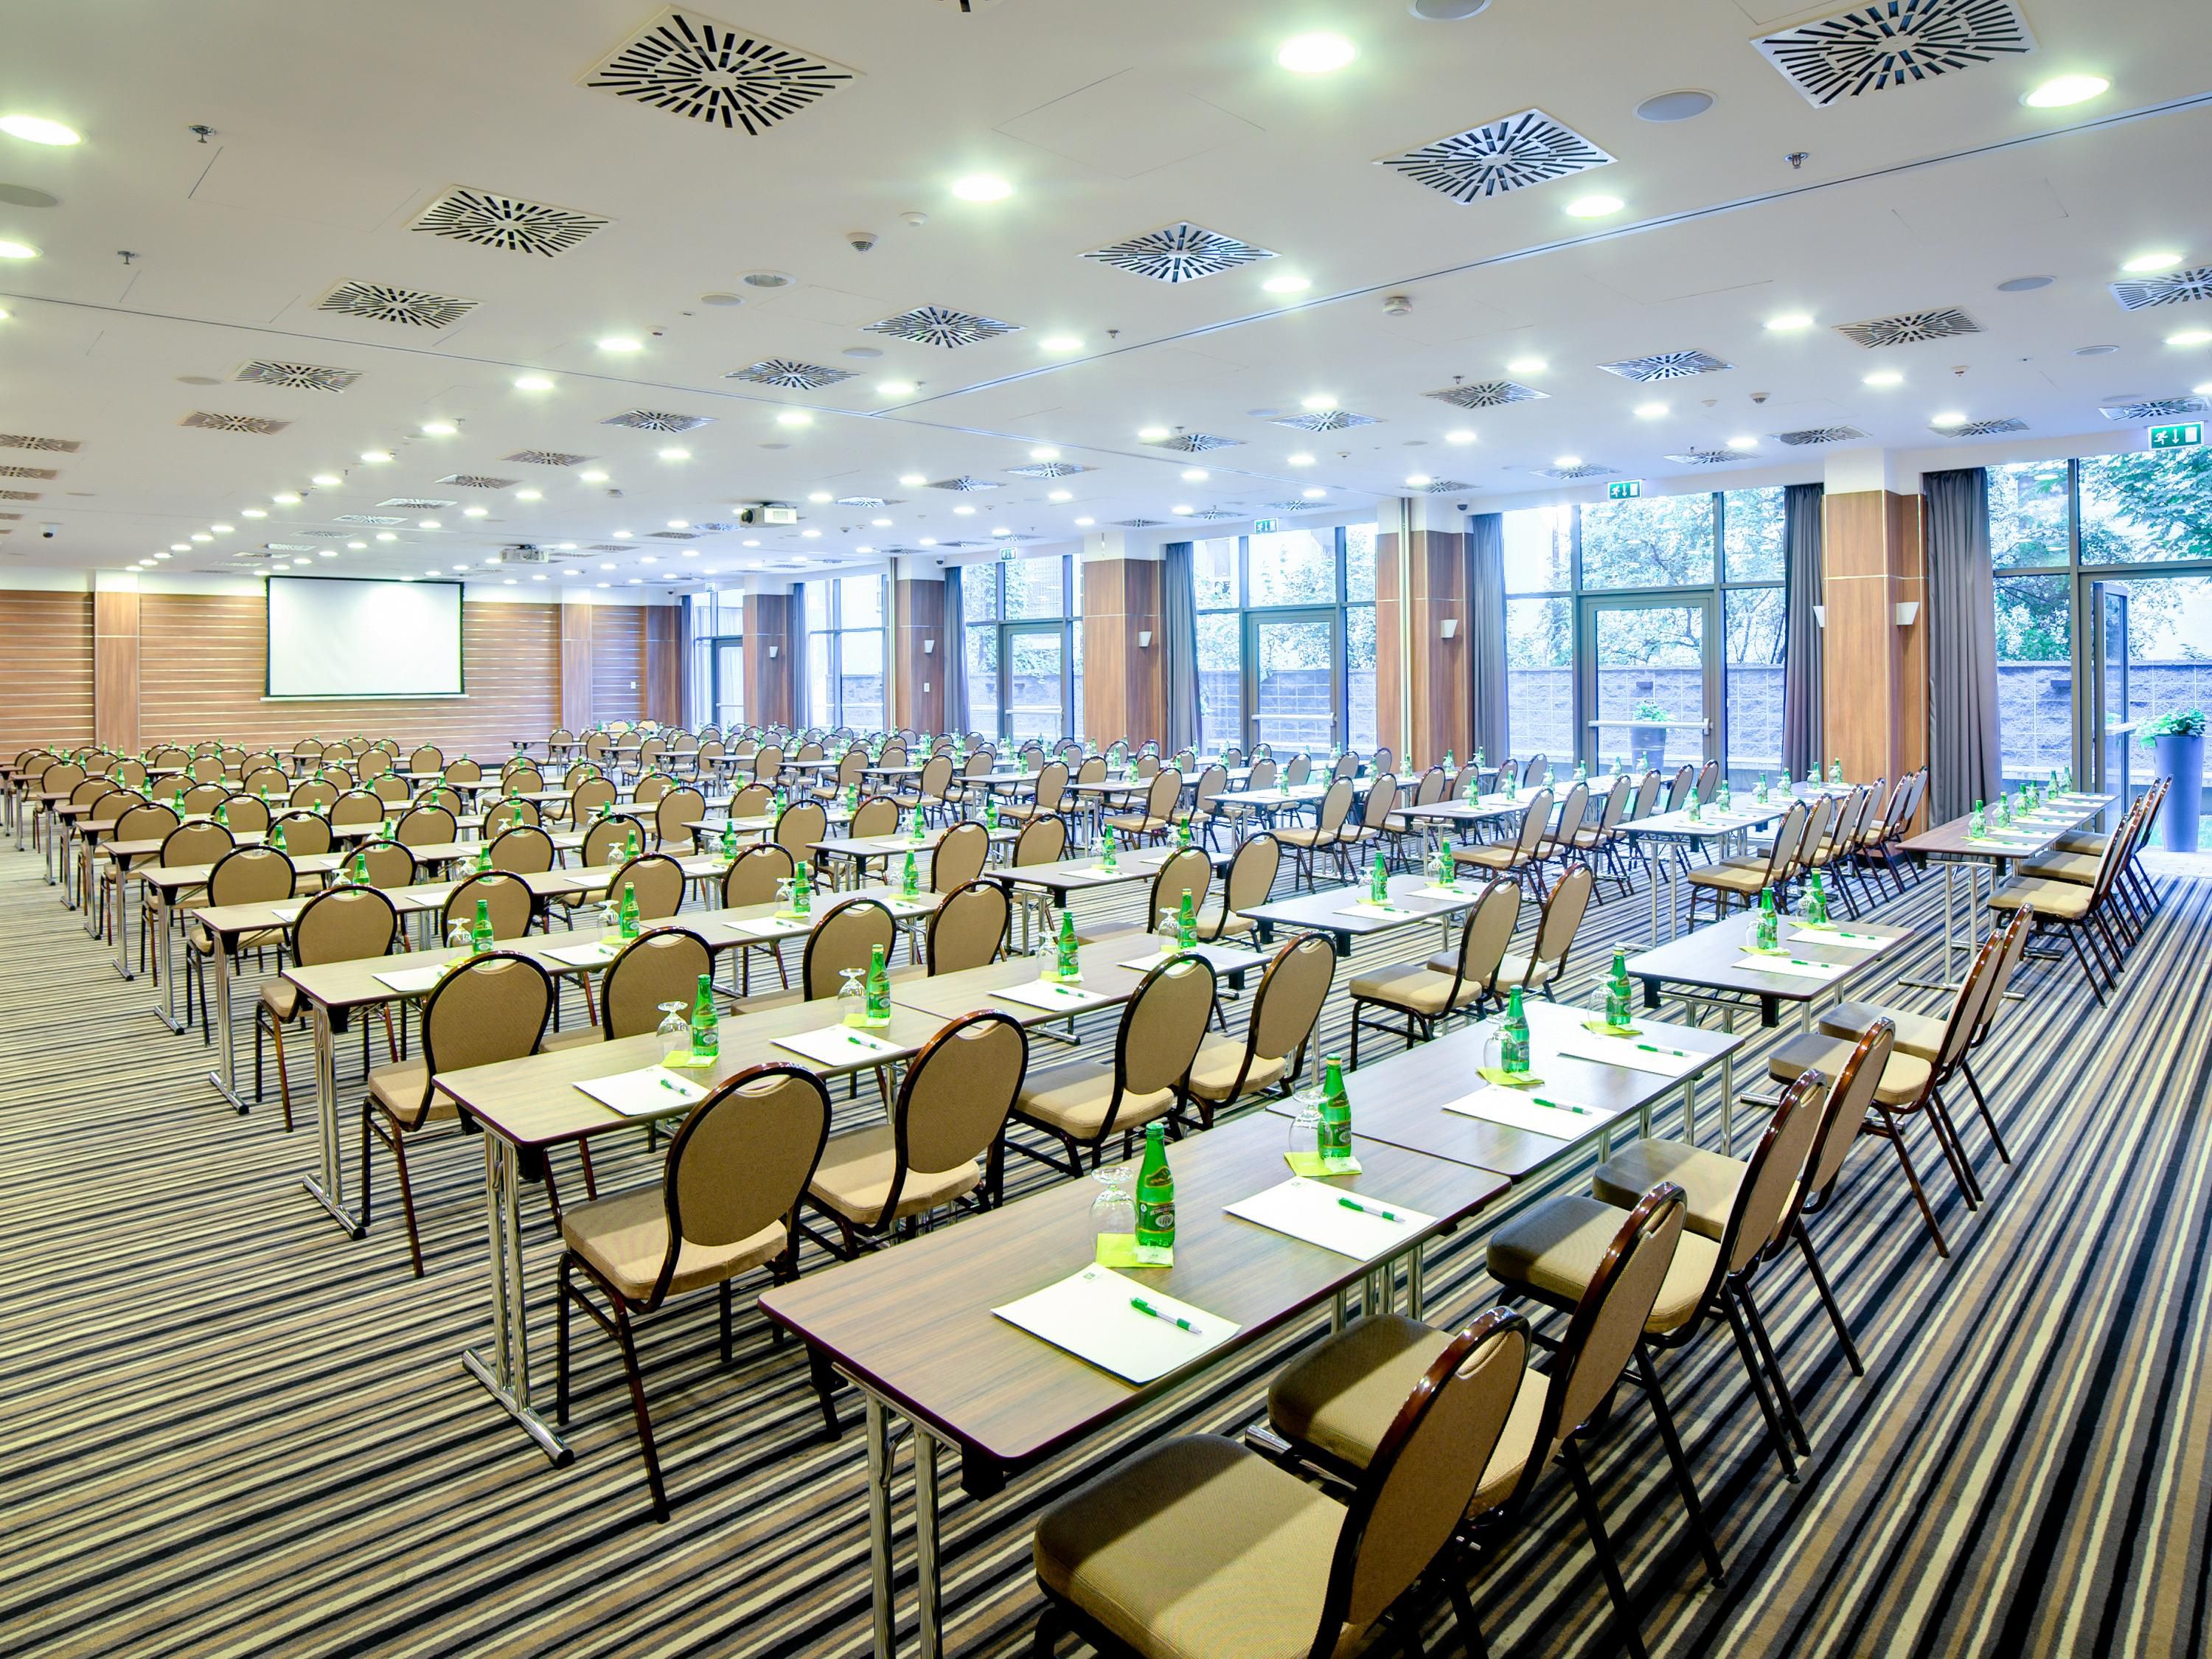 Welcome to a modern conference centre in the heart of Krakow. We offer 12 fully equipped conference rooms. Our conference and events facilities consist of three levels, with a total conference space of over 1500 m2. If you wold like to check the availability please contact our conference department. 